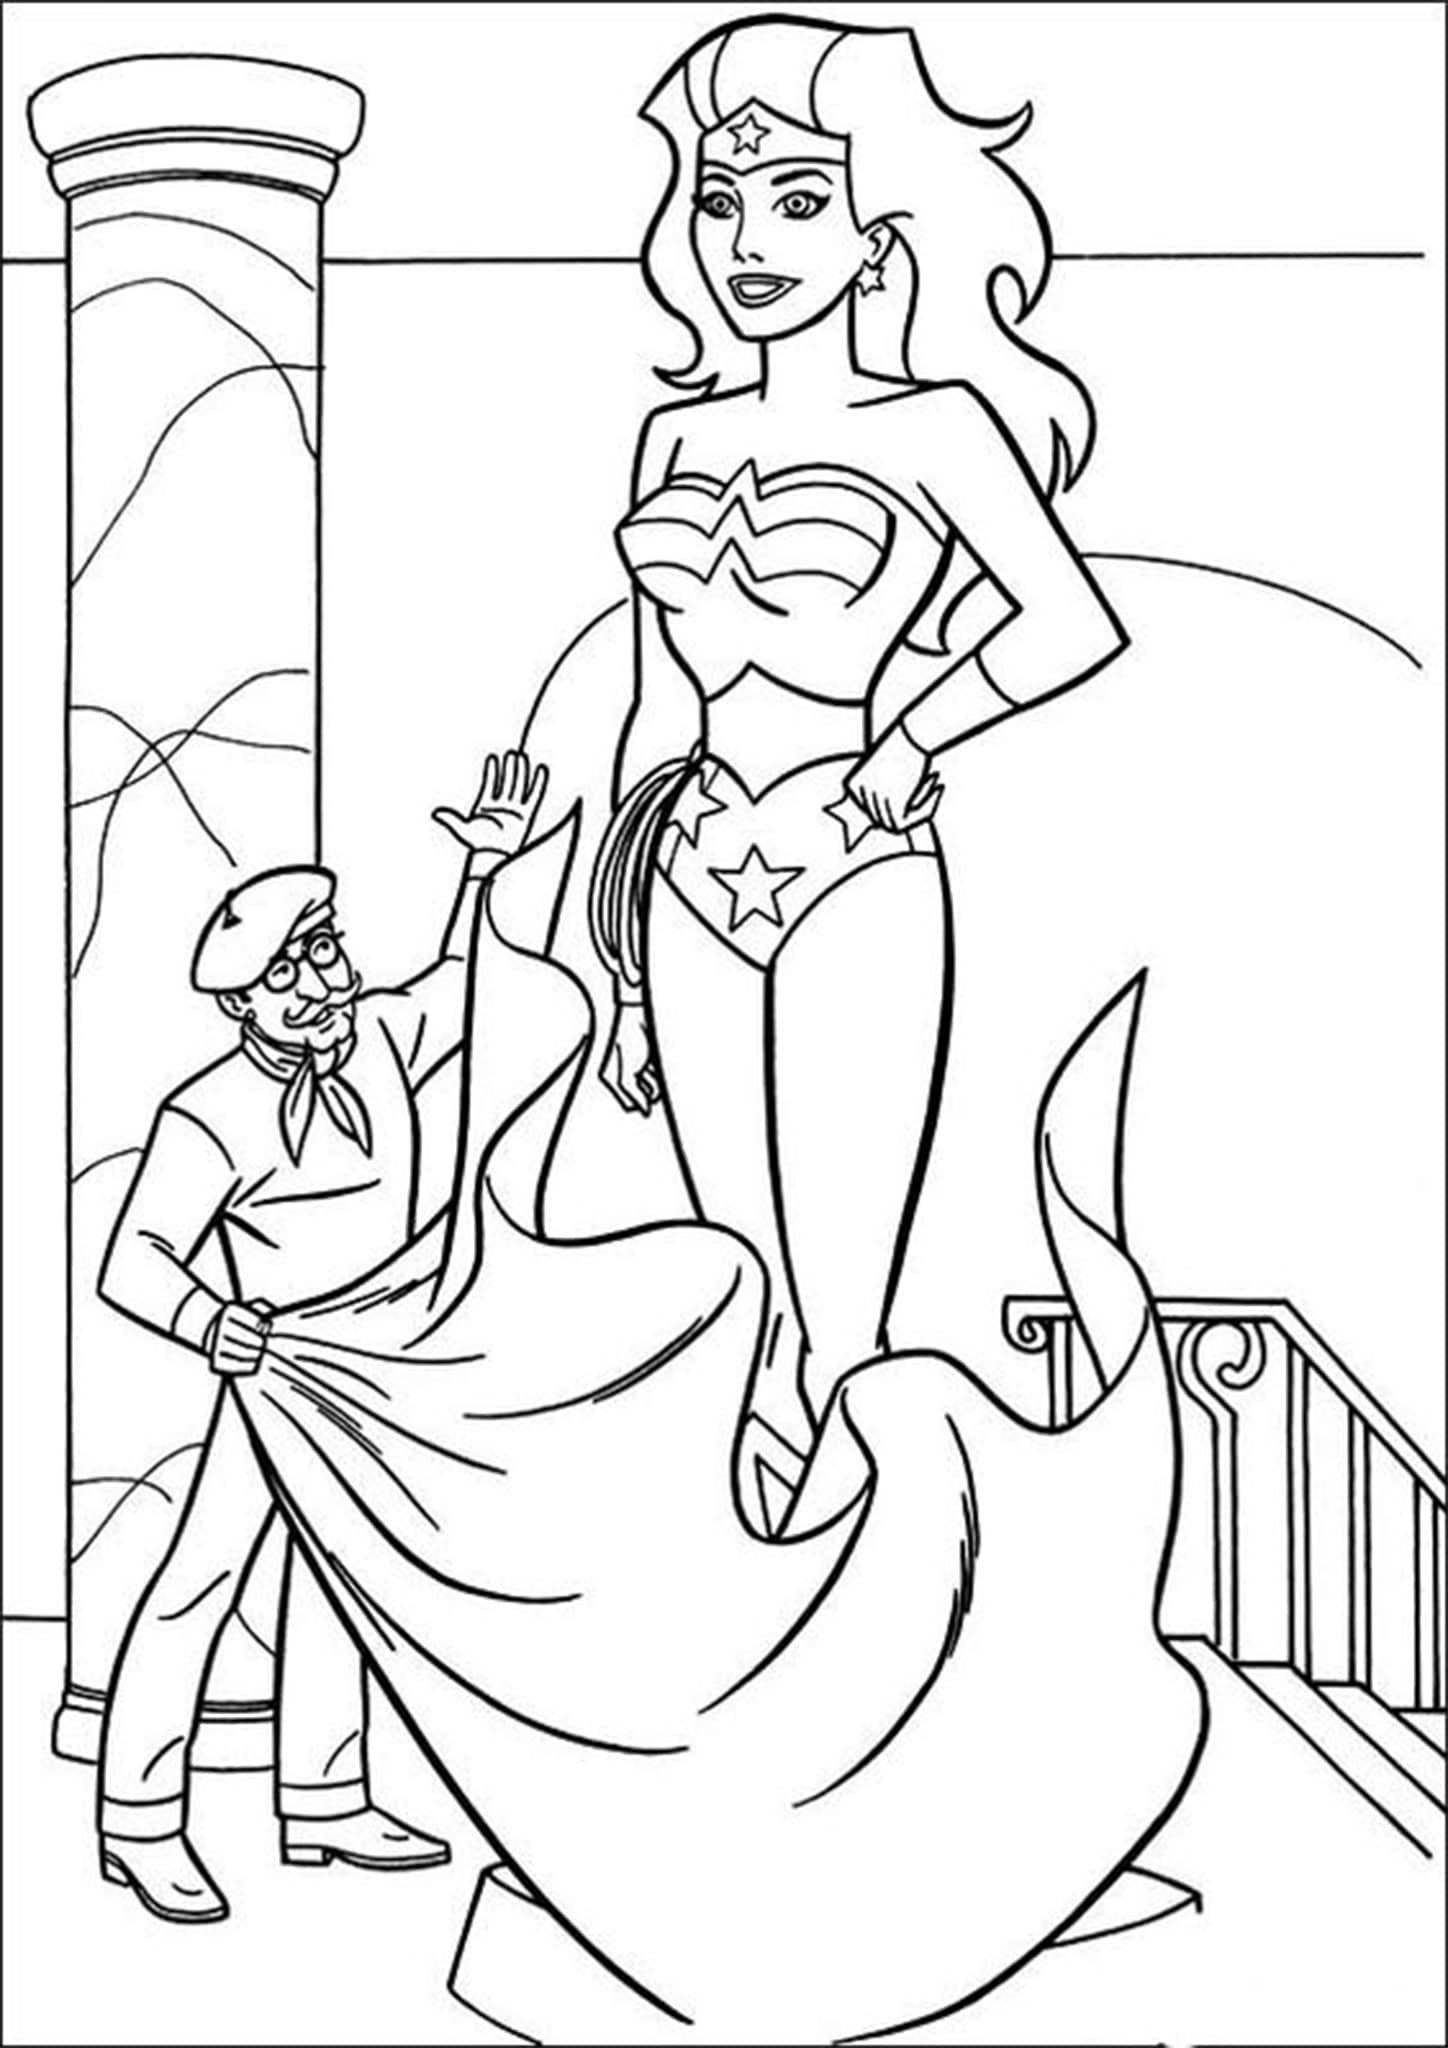 Free easy to print wonder woman coloring pages superhero coloring pages superhero coloring star coloring pages